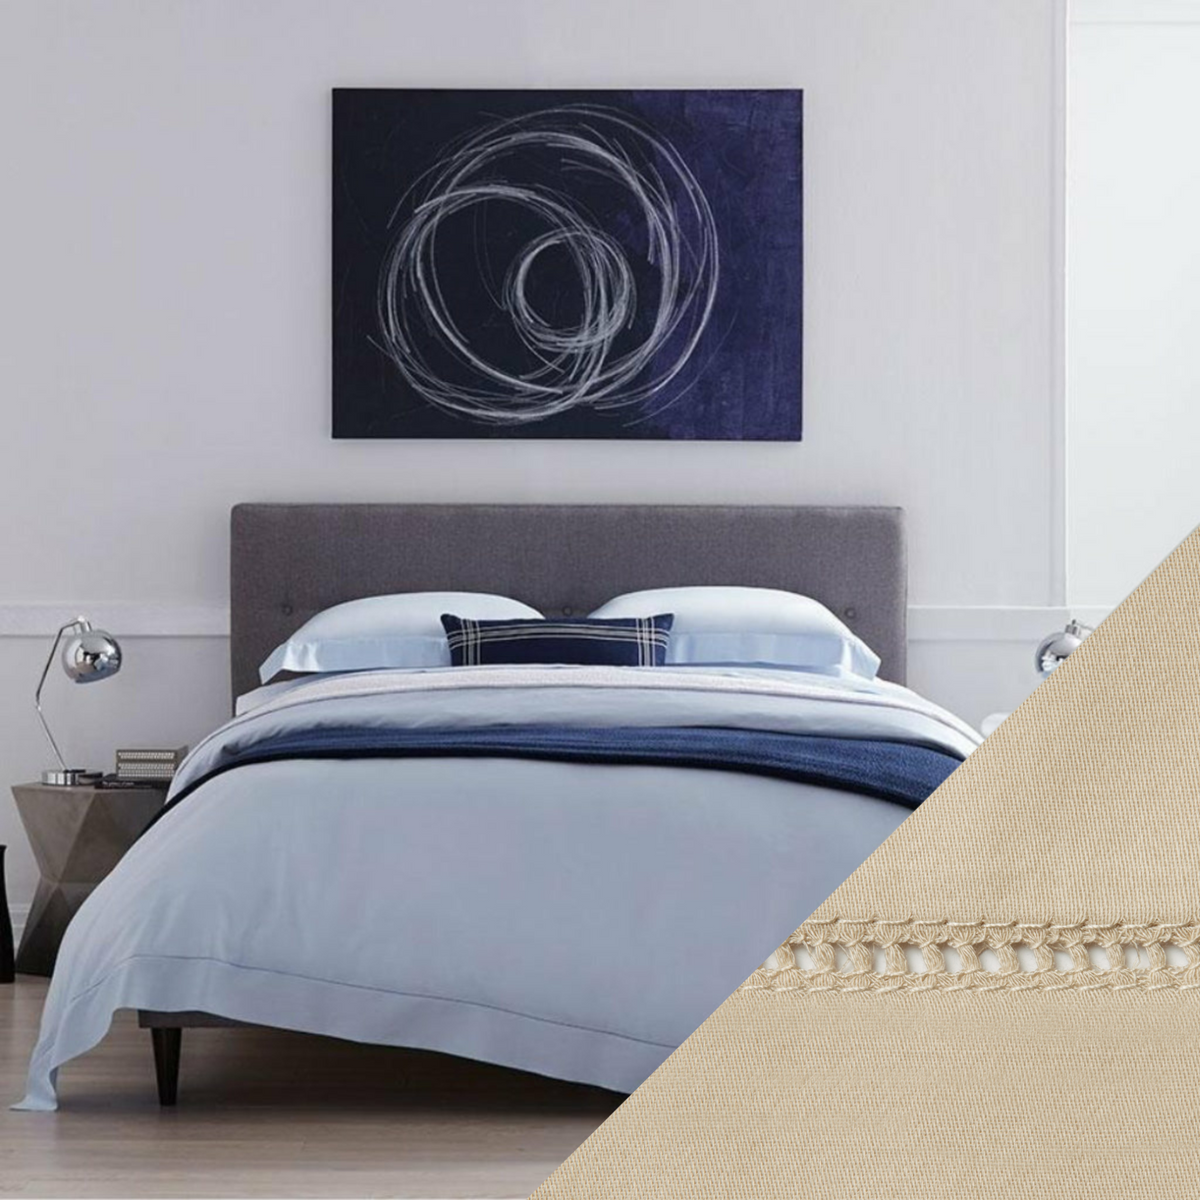 Full Lifestyle Image of Sferra Fiona Bedding with Swatch of Sand